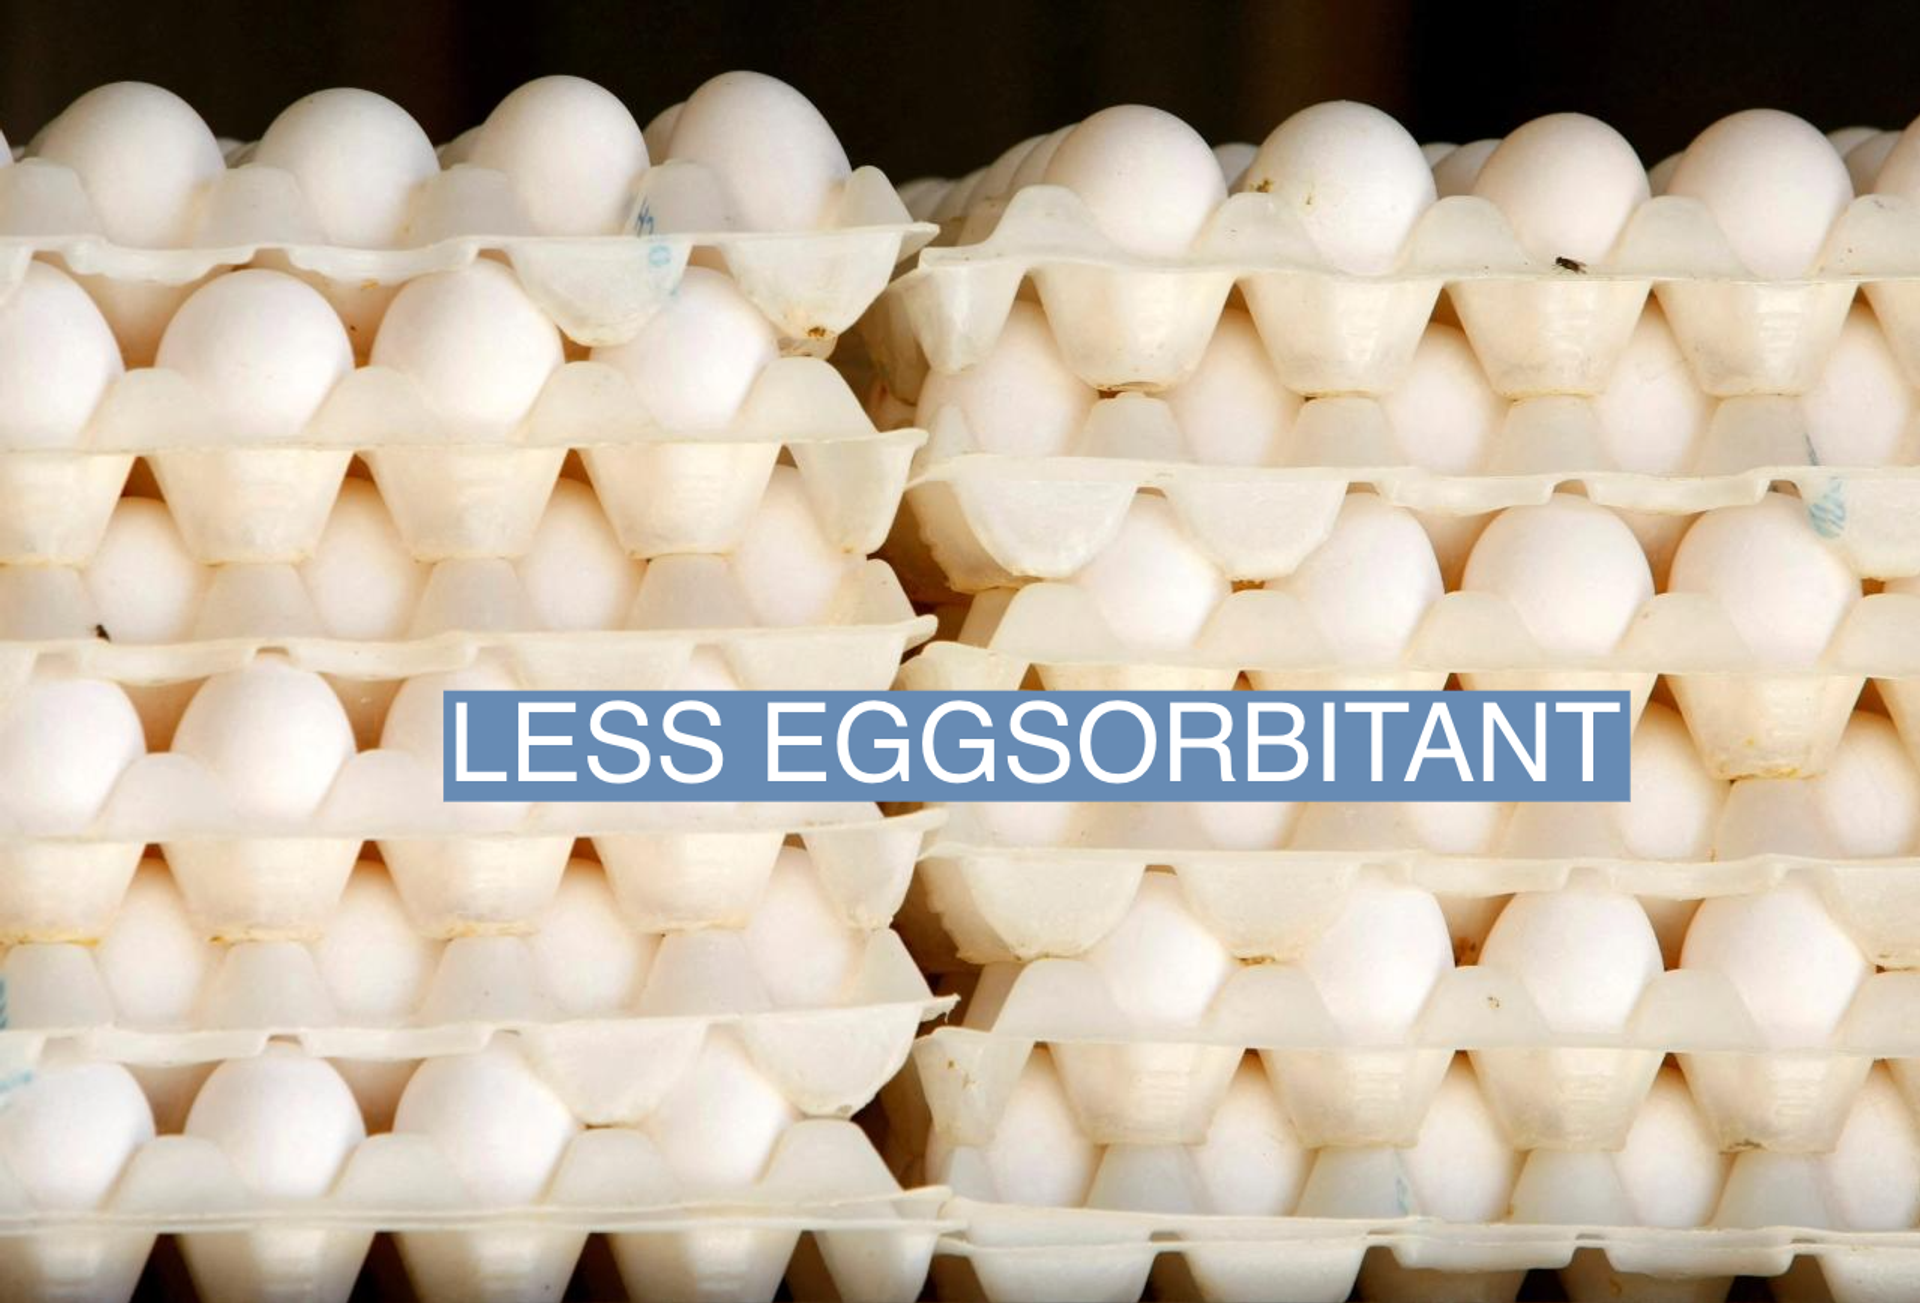 Some of the thousands of eggs produced each day by caged hens are stacked up at an egg farm in San Diego County.